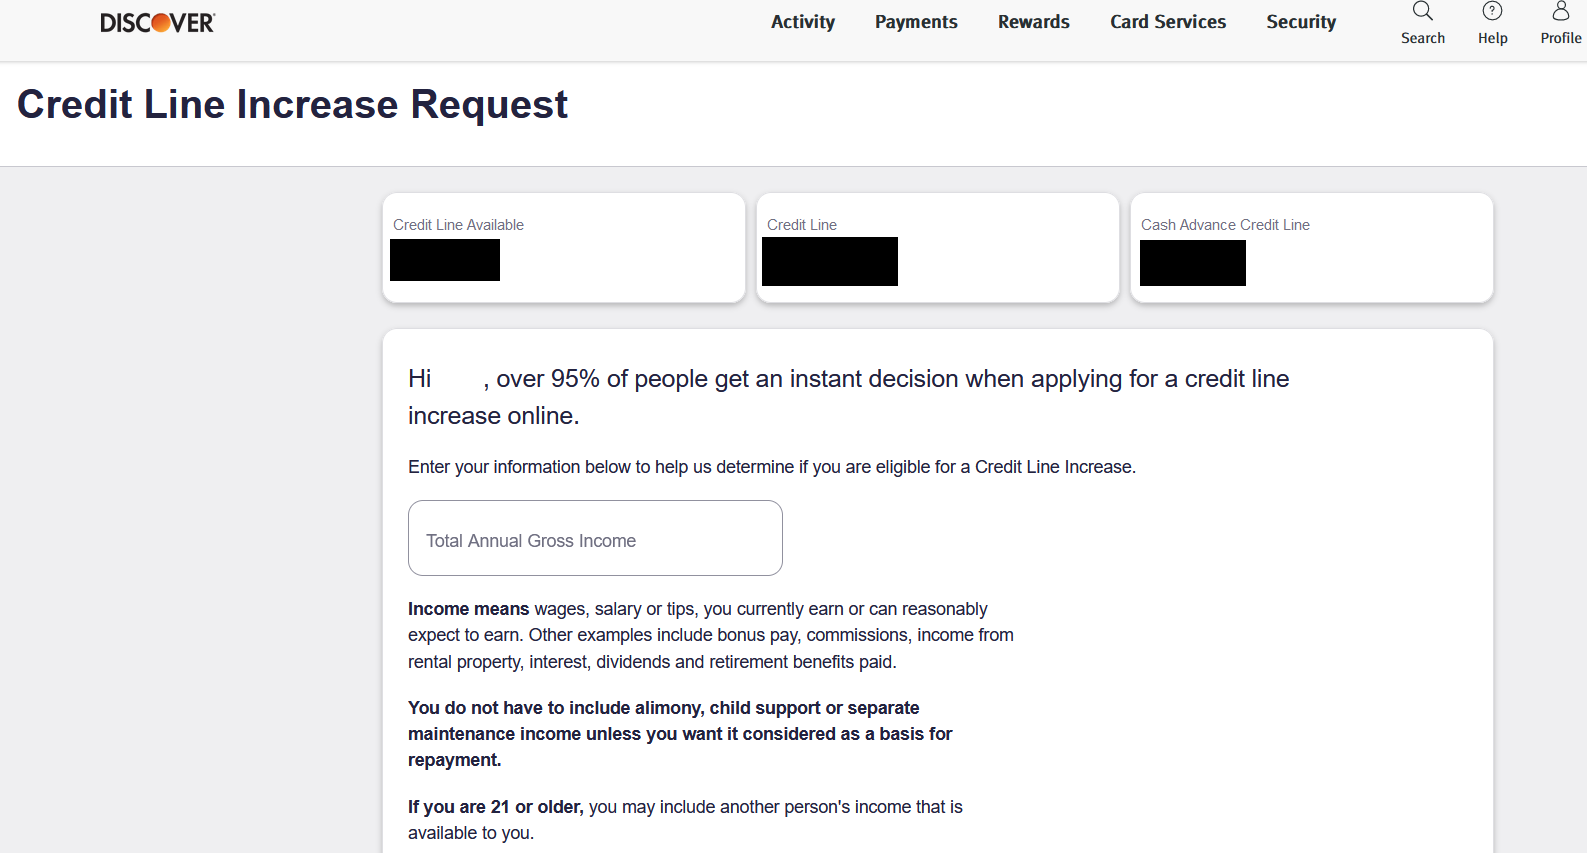 Accessing a credit line increase request form